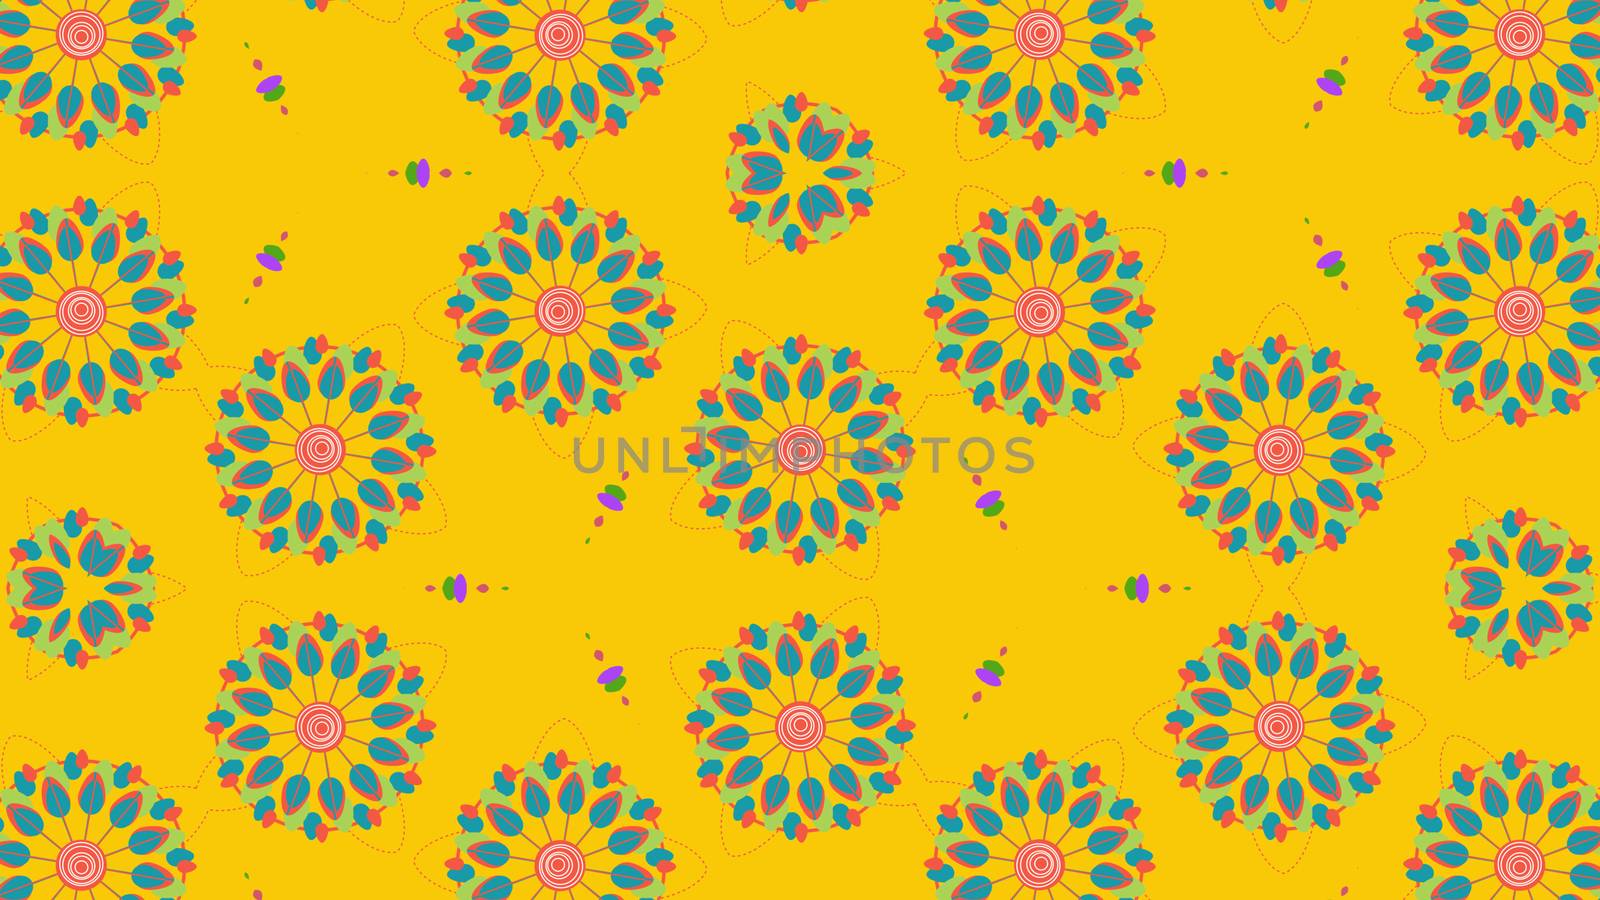 Many flowers in circles in yellow backdrop by klss